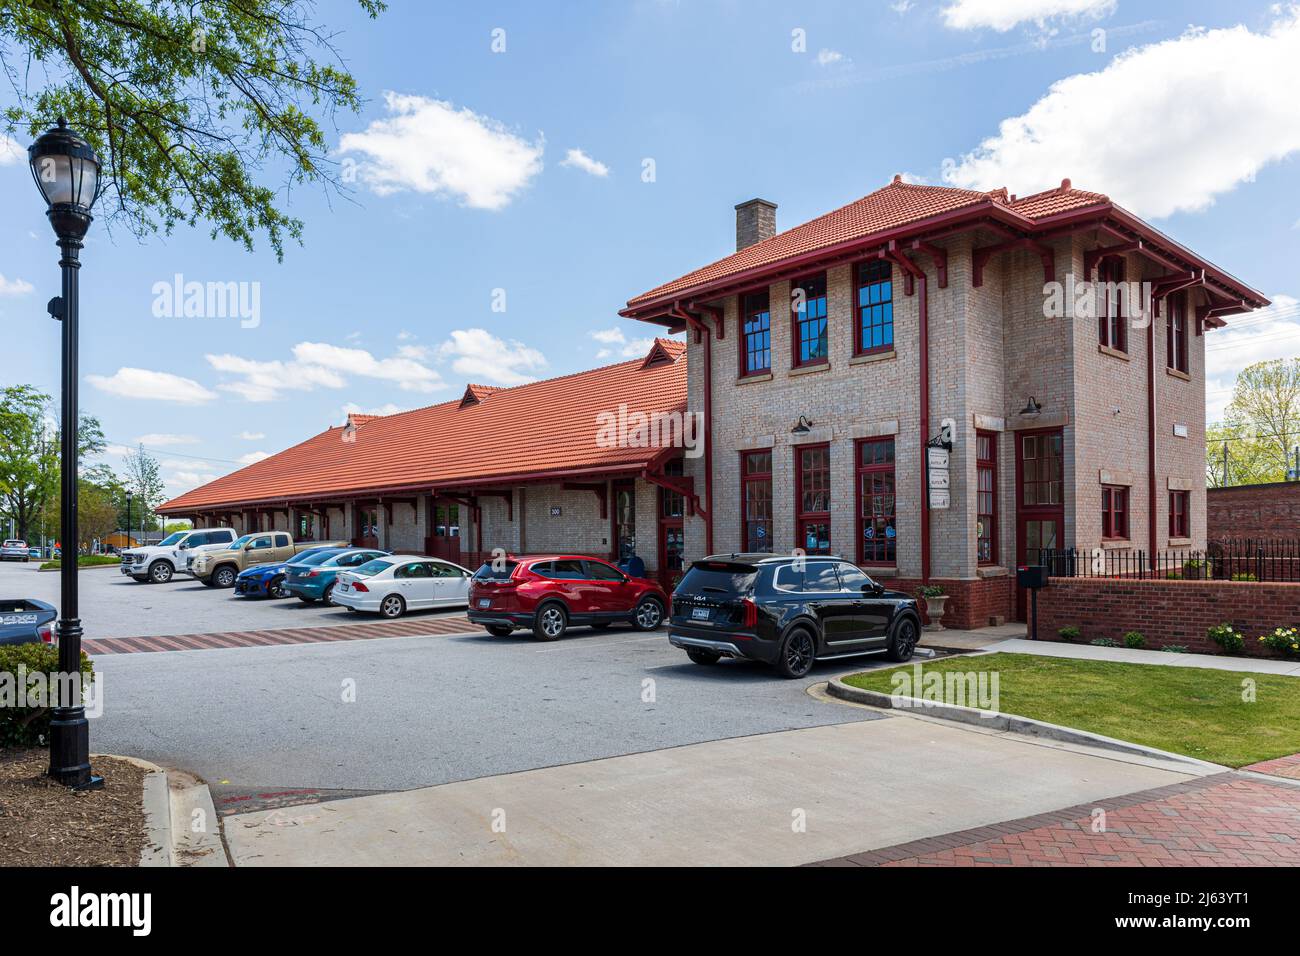 GREER, SC, USA 24 APRIL 2022: Old Train Depot, now housing offices and small businesses.  Diagonal view of building and parking lot. Stock Photo